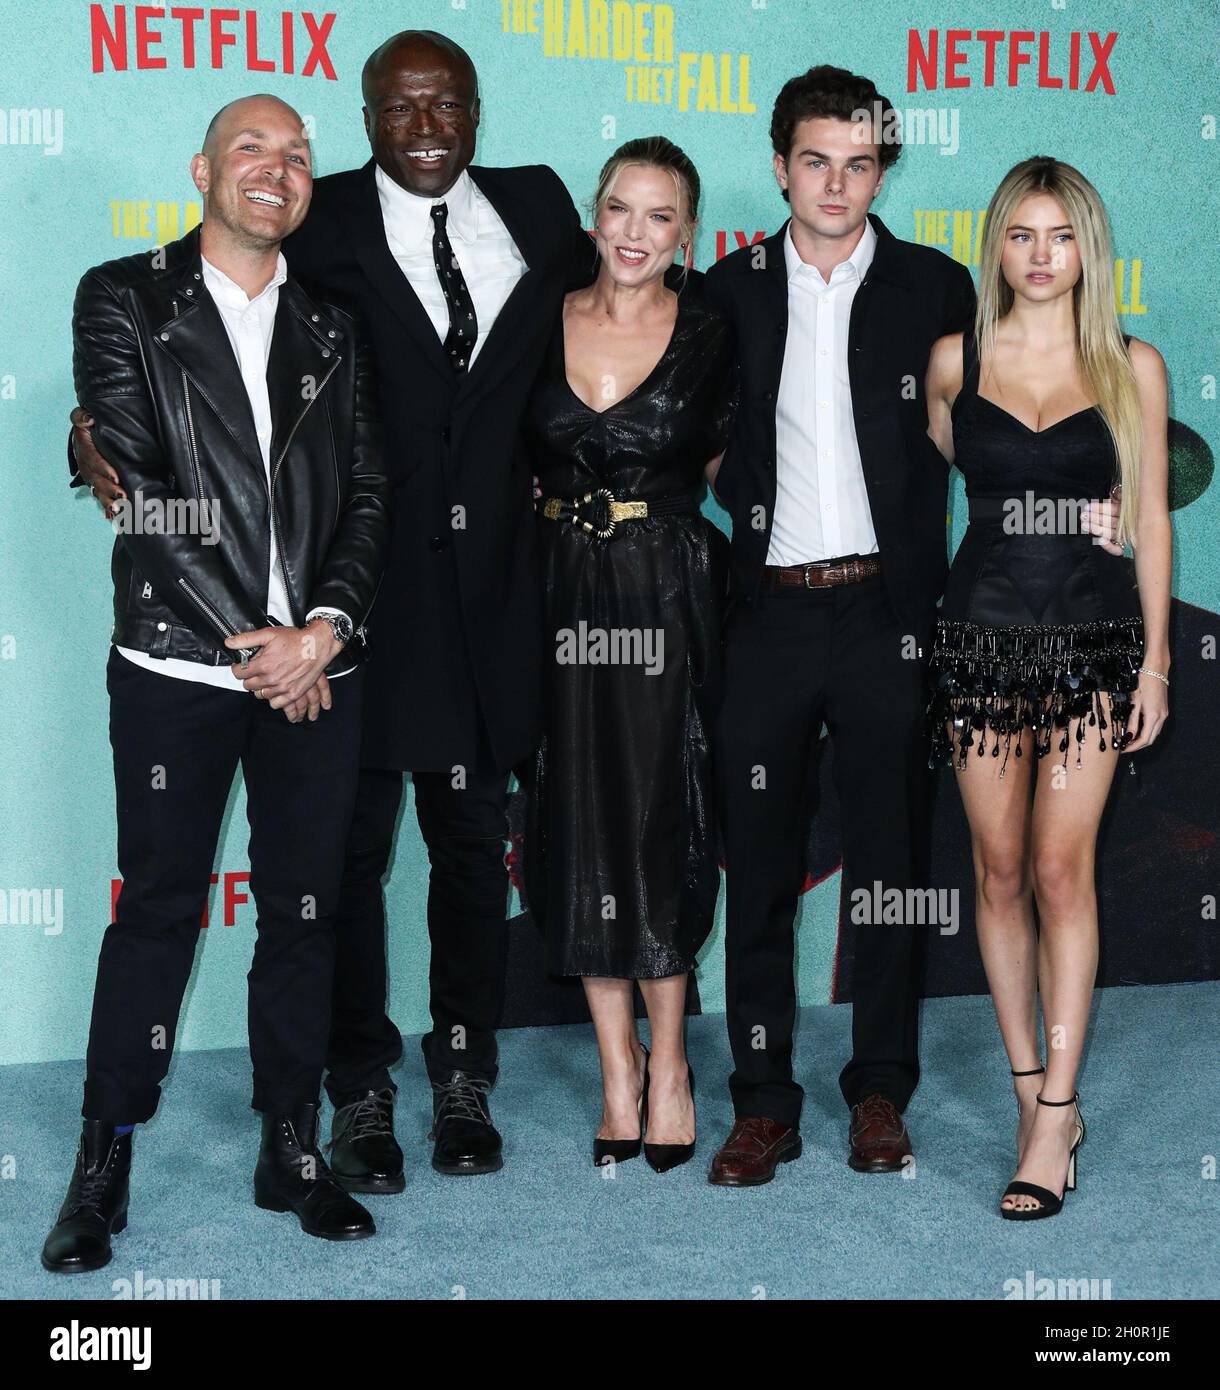 LOS ANGELES, CALIFORNIA, USA - OCTOBER 13: Singer-songwriter Seal (Henry Olusegun Adeola Samuel), girlfriend Laura Strayer, Aris Rachevsky and model Leni Olumi Klum arrive at the Los Angeles Premiere Of Netflix's 'The Harder They Fall' held at the Shrine Auditorium and Expo Hall on October 13, 2021 in Los Angeles, California, United States. (Photo by Xavier Collin/Image Press Agency) Stock Photo